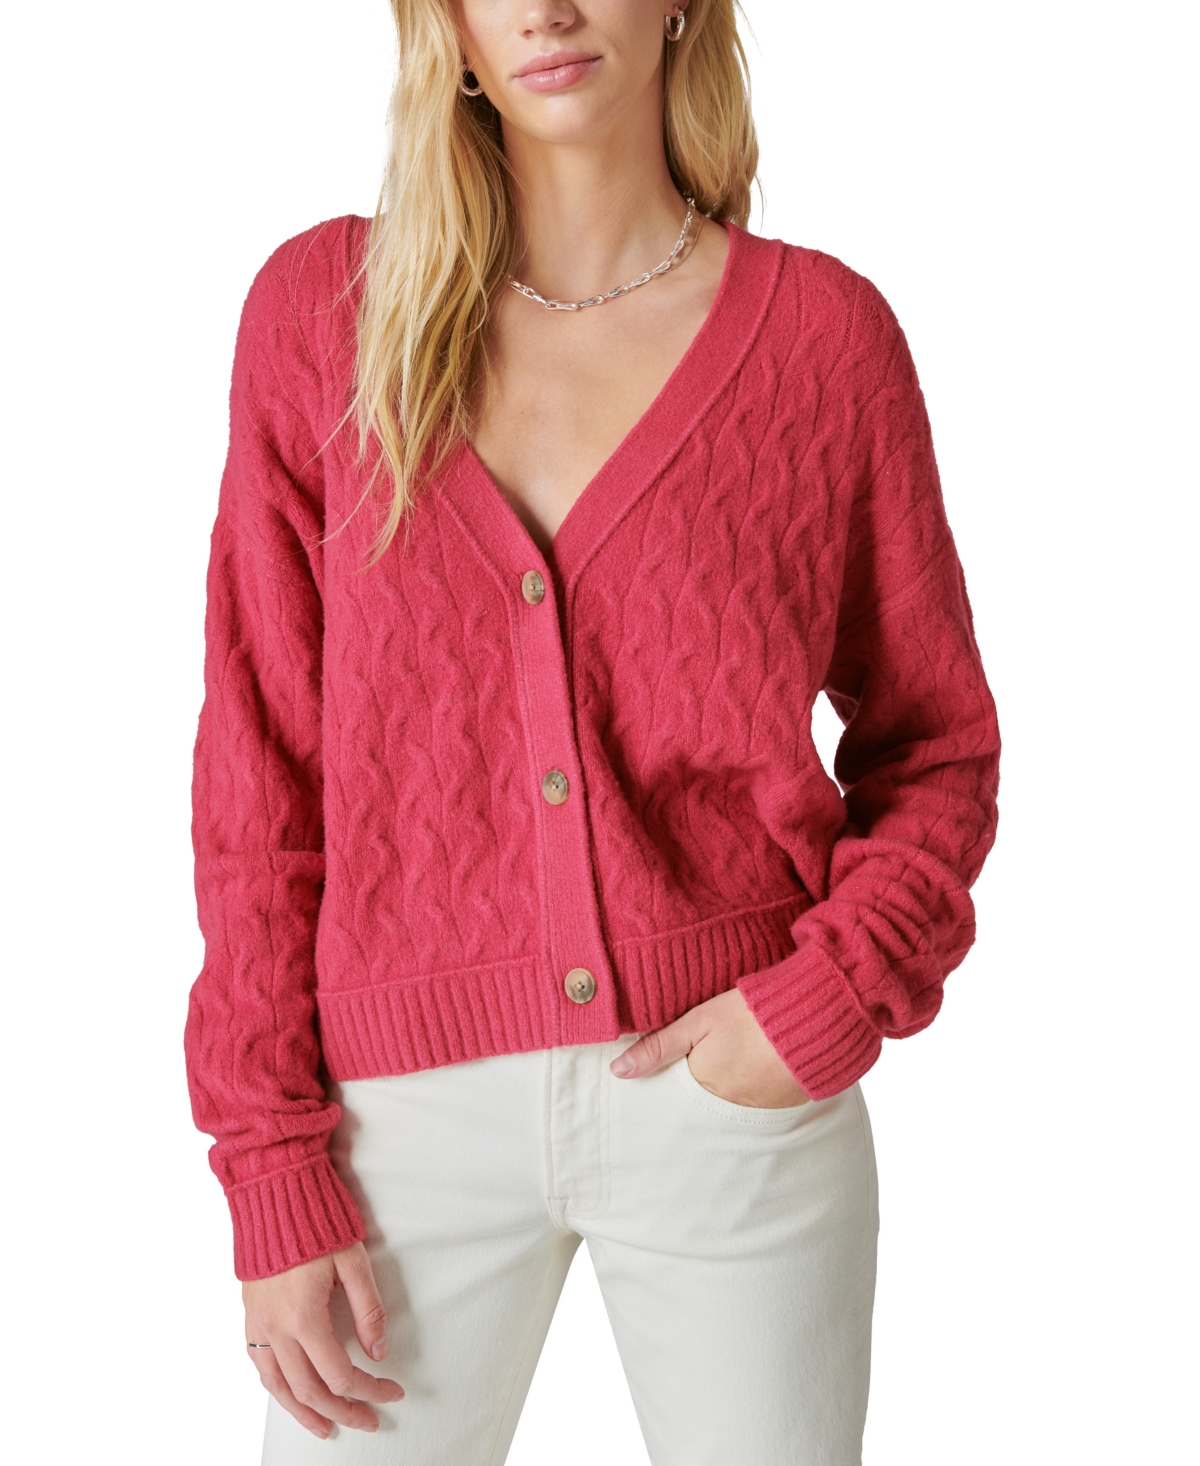 LUCKY BRAND WOMEN'S COZY CABLE-KNIT BUTTON-FRONT CARDIGAN